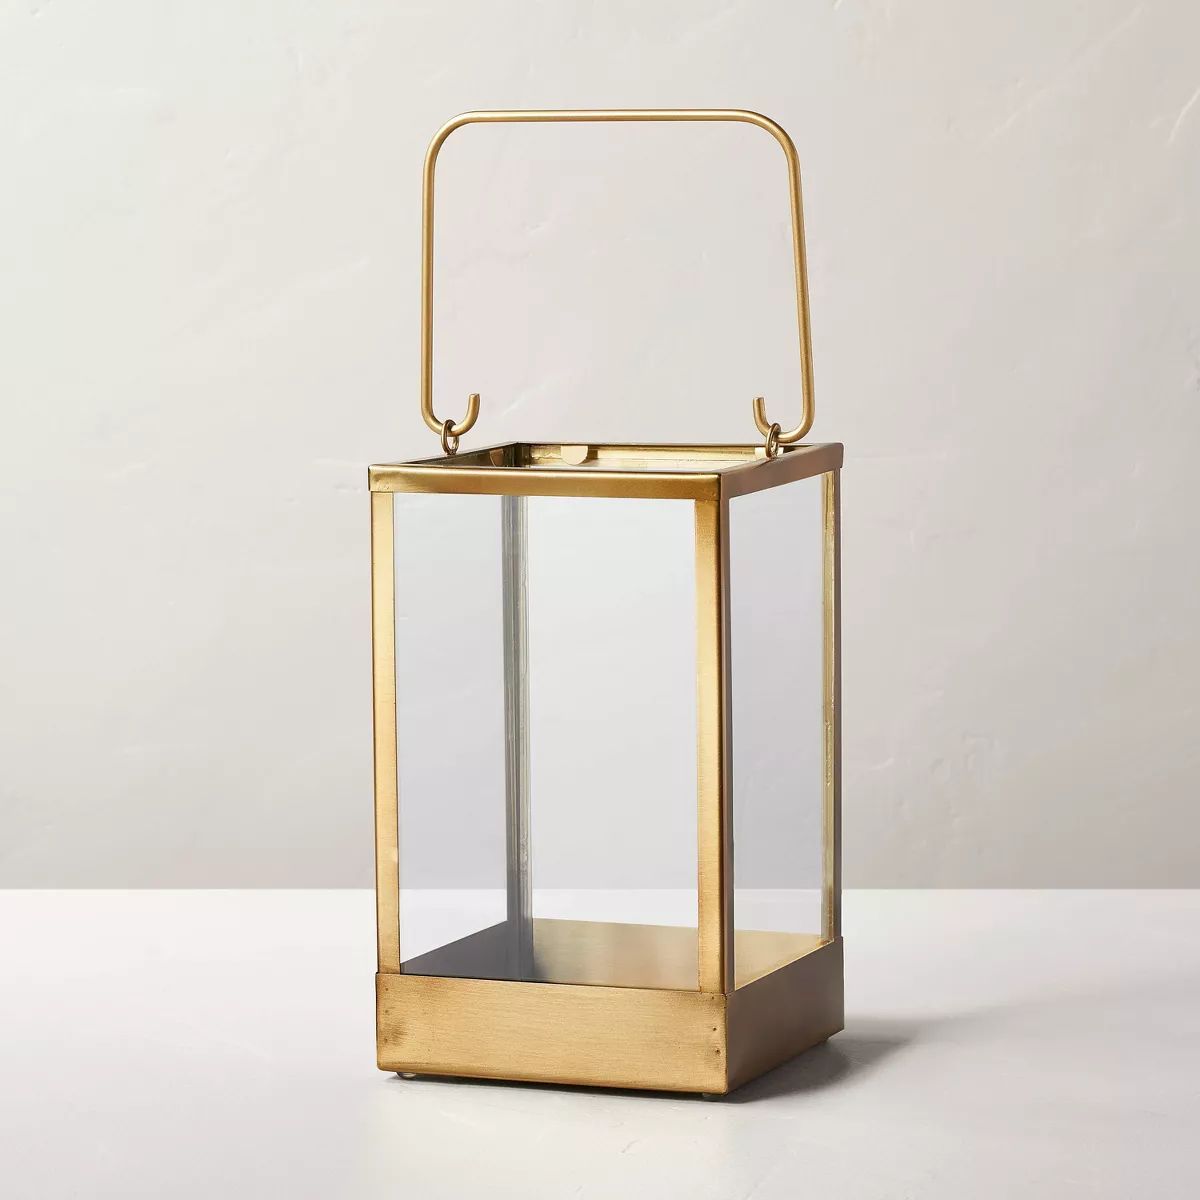 Square Metal & Glass Pillar Candle Lantern - Hearth & Hand™ with Magnolia | Target